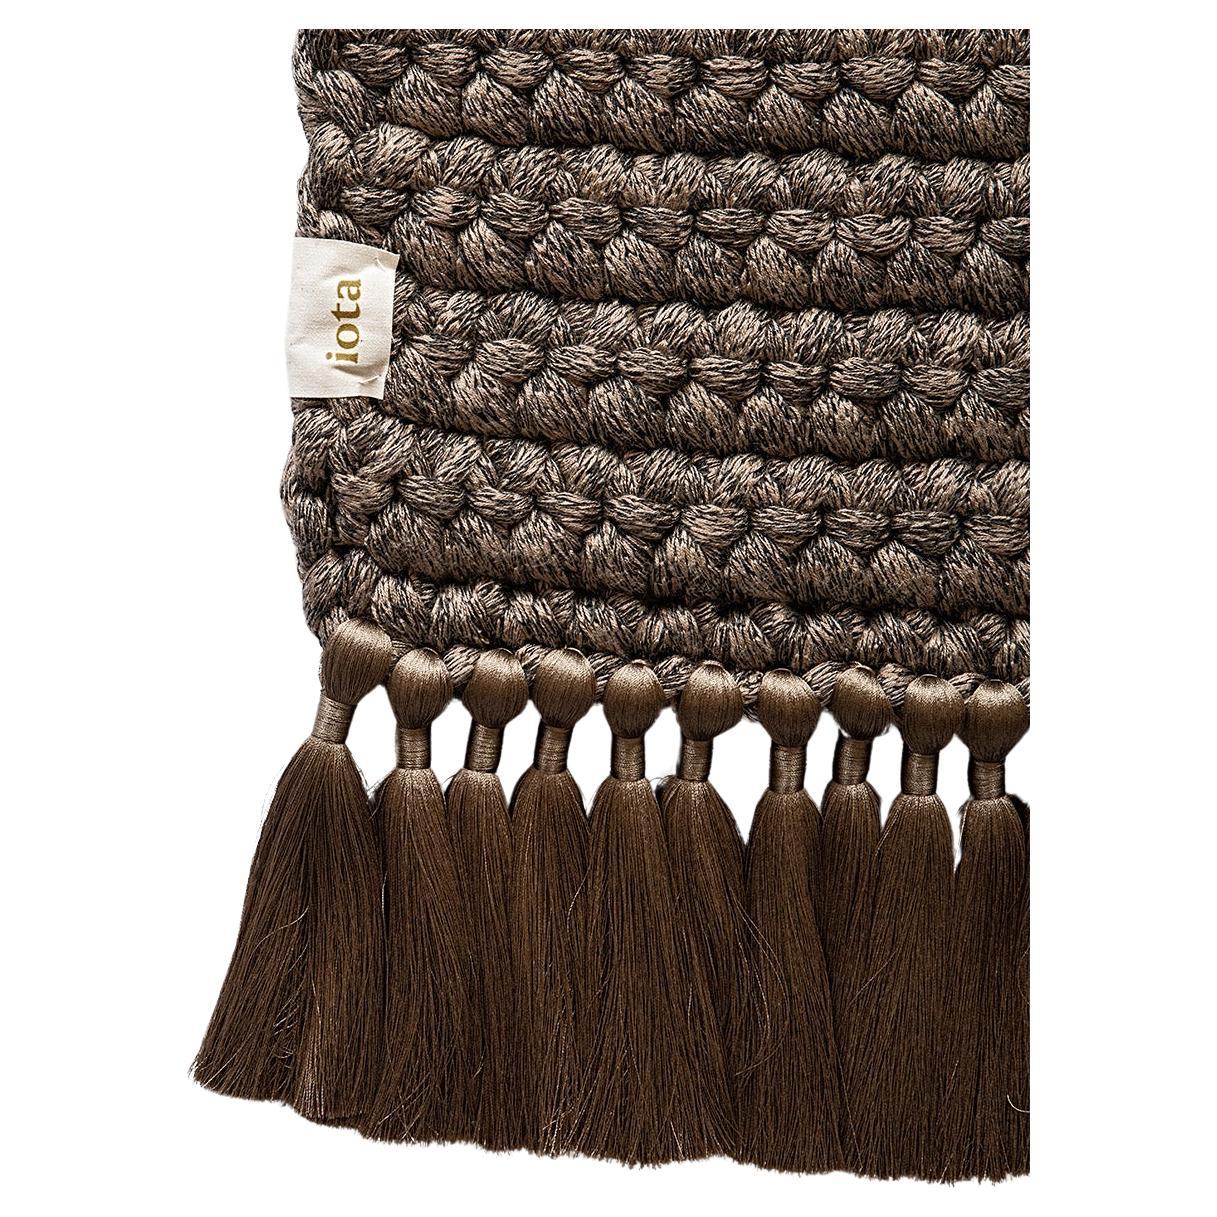 Handmade Crochet XL Thick Rug in Cacao Black Made of Cotton & Polyester For Sale